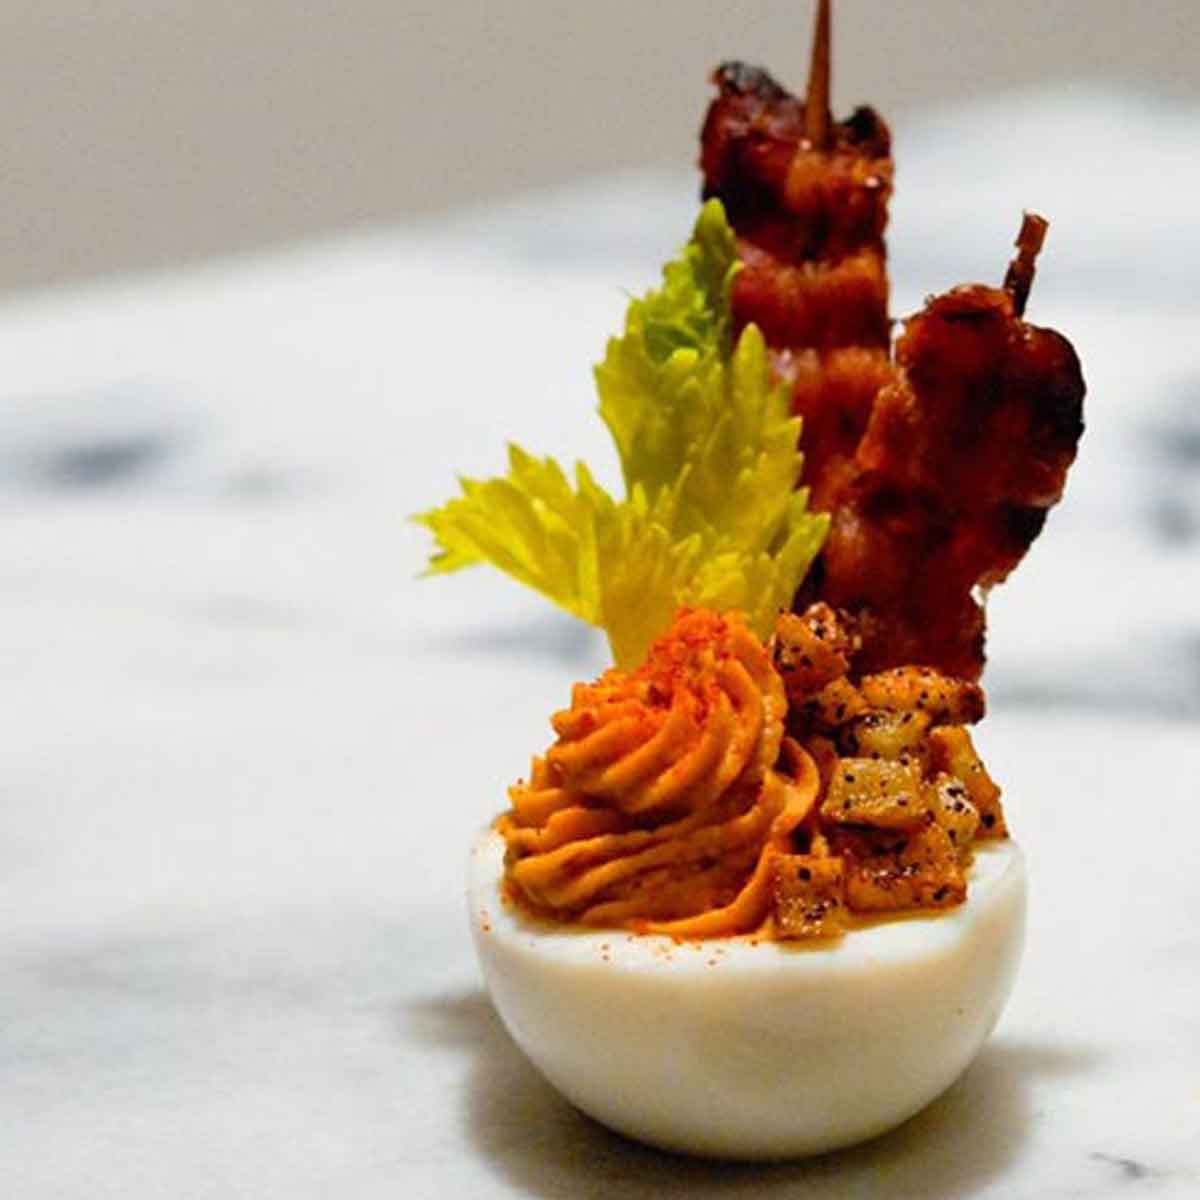 A deviled egg with bacon, celery, and tiny hash browns on a marble table.